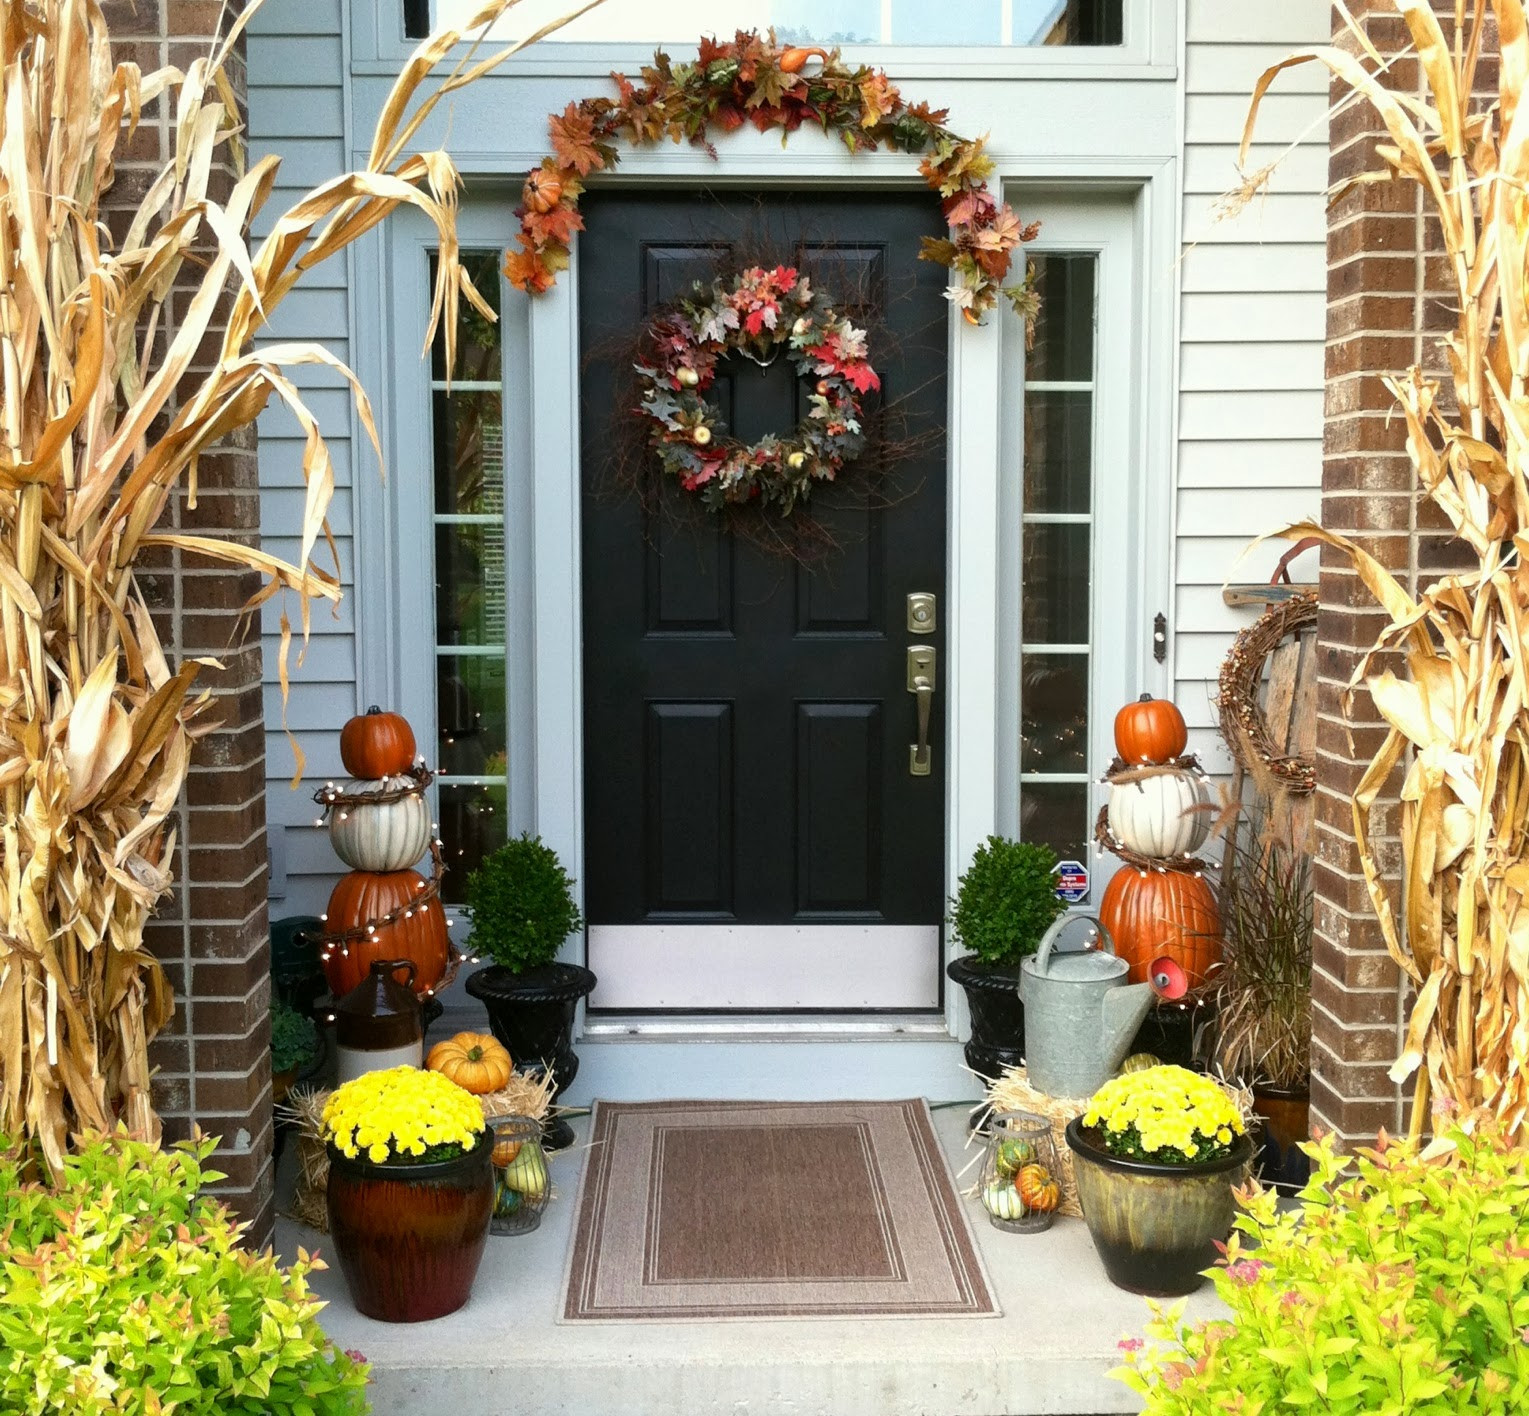 Fall Decor For Front Porch
 Eleanor Olander This is me Fall Front Porch Decor